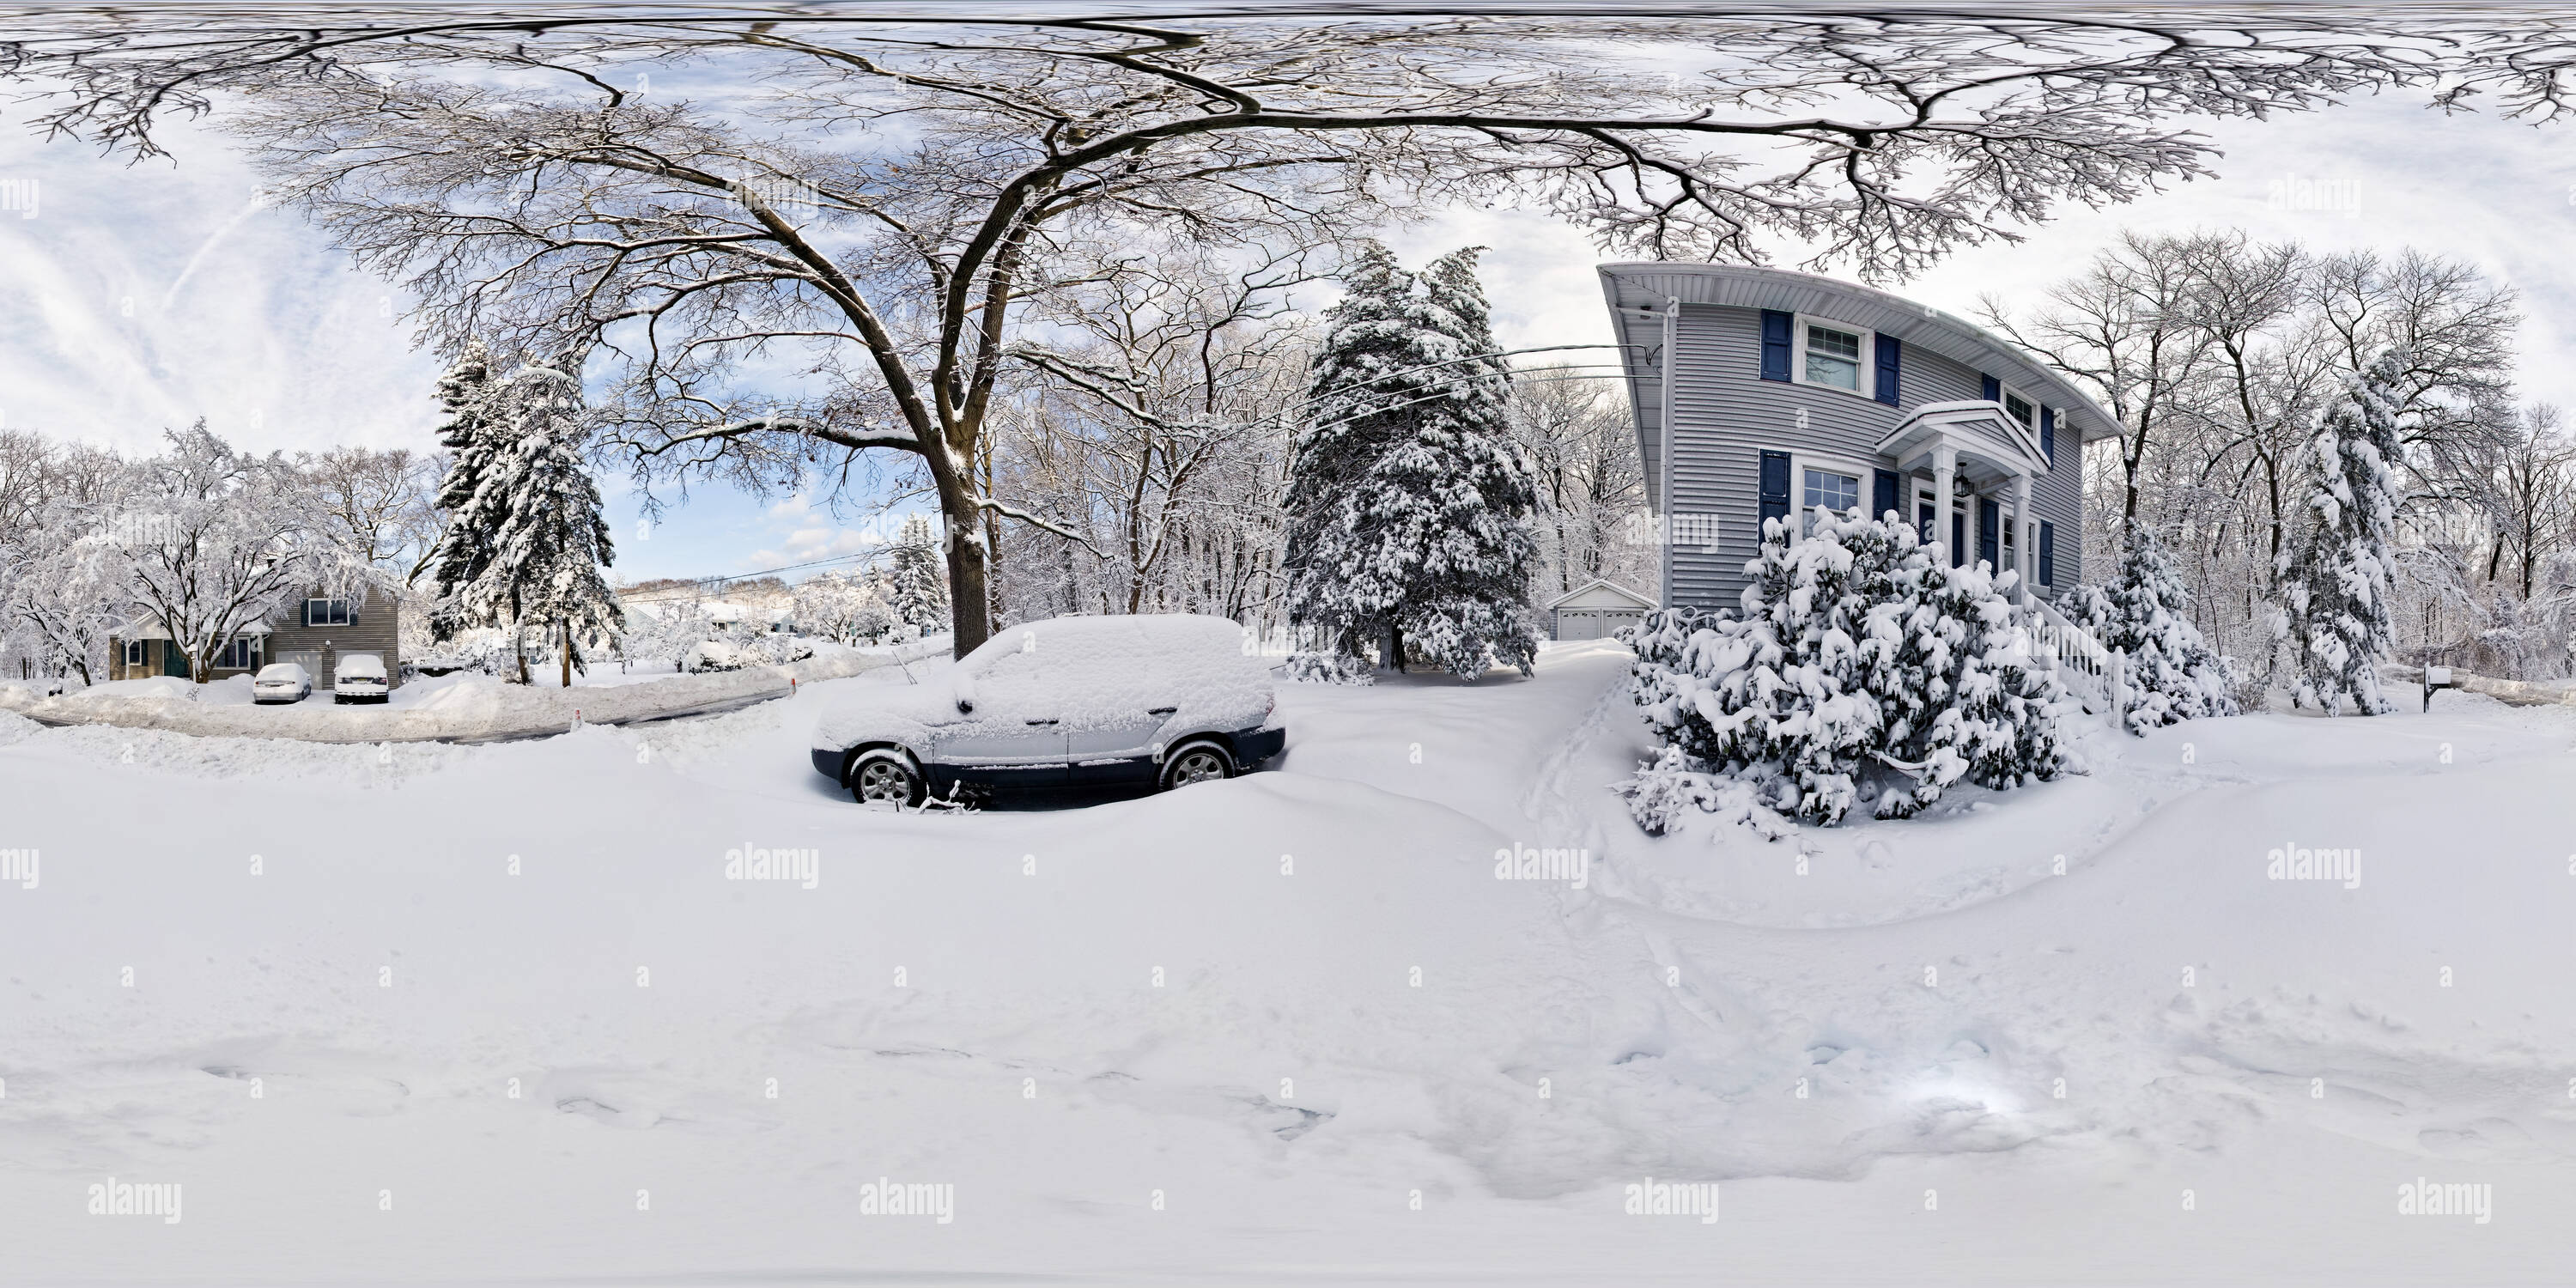 360 degree panoramic view of More Snow, Hartshorne Woods, Monmouth County, New Jersey